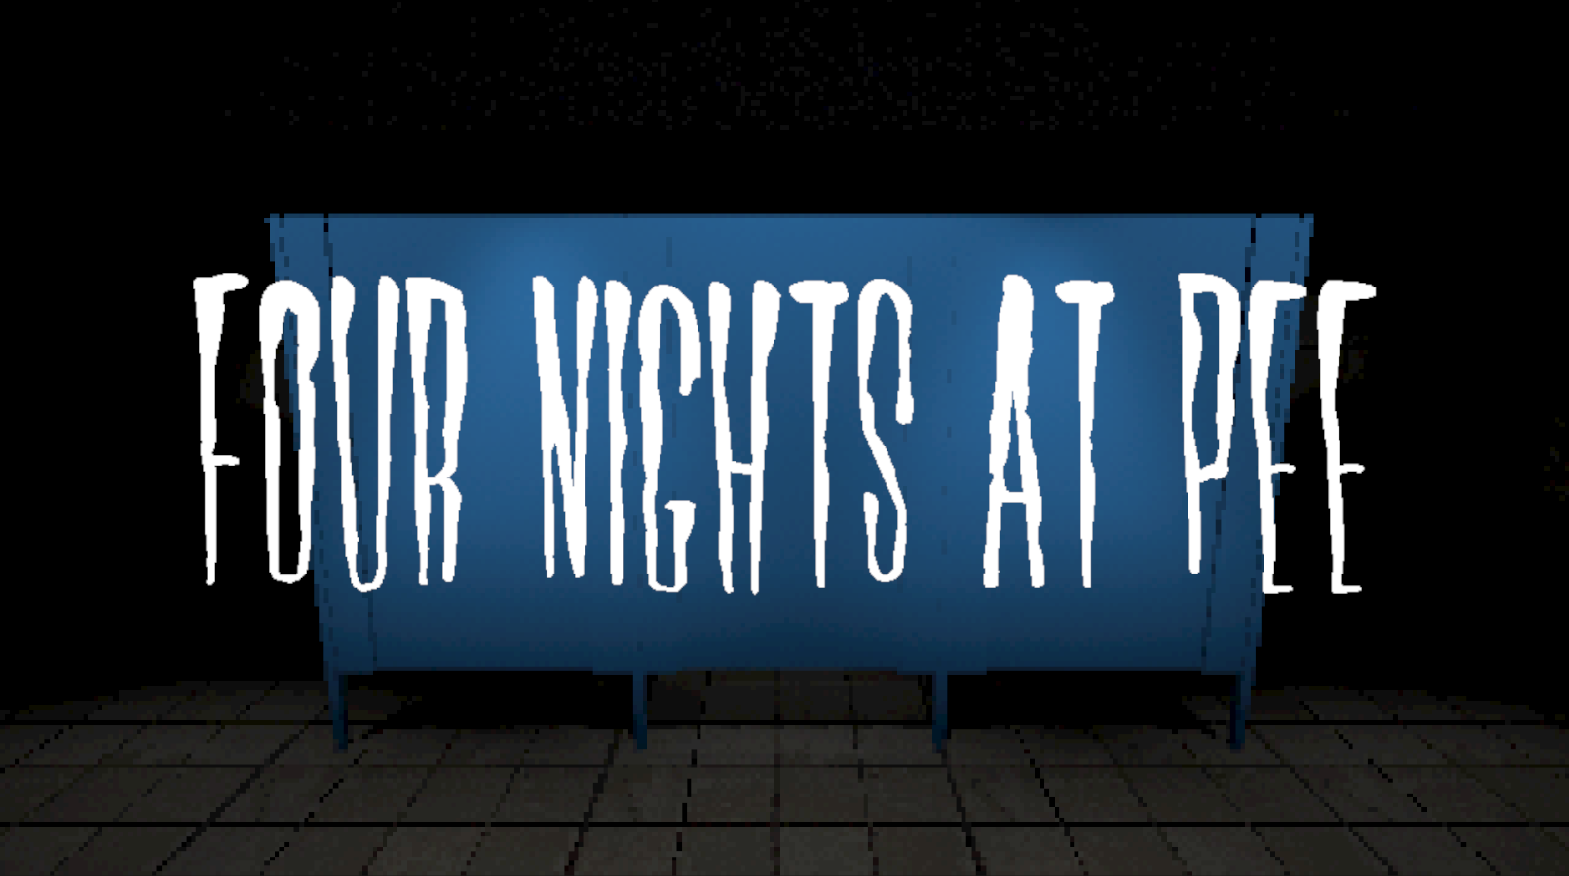 Four nights at Pee